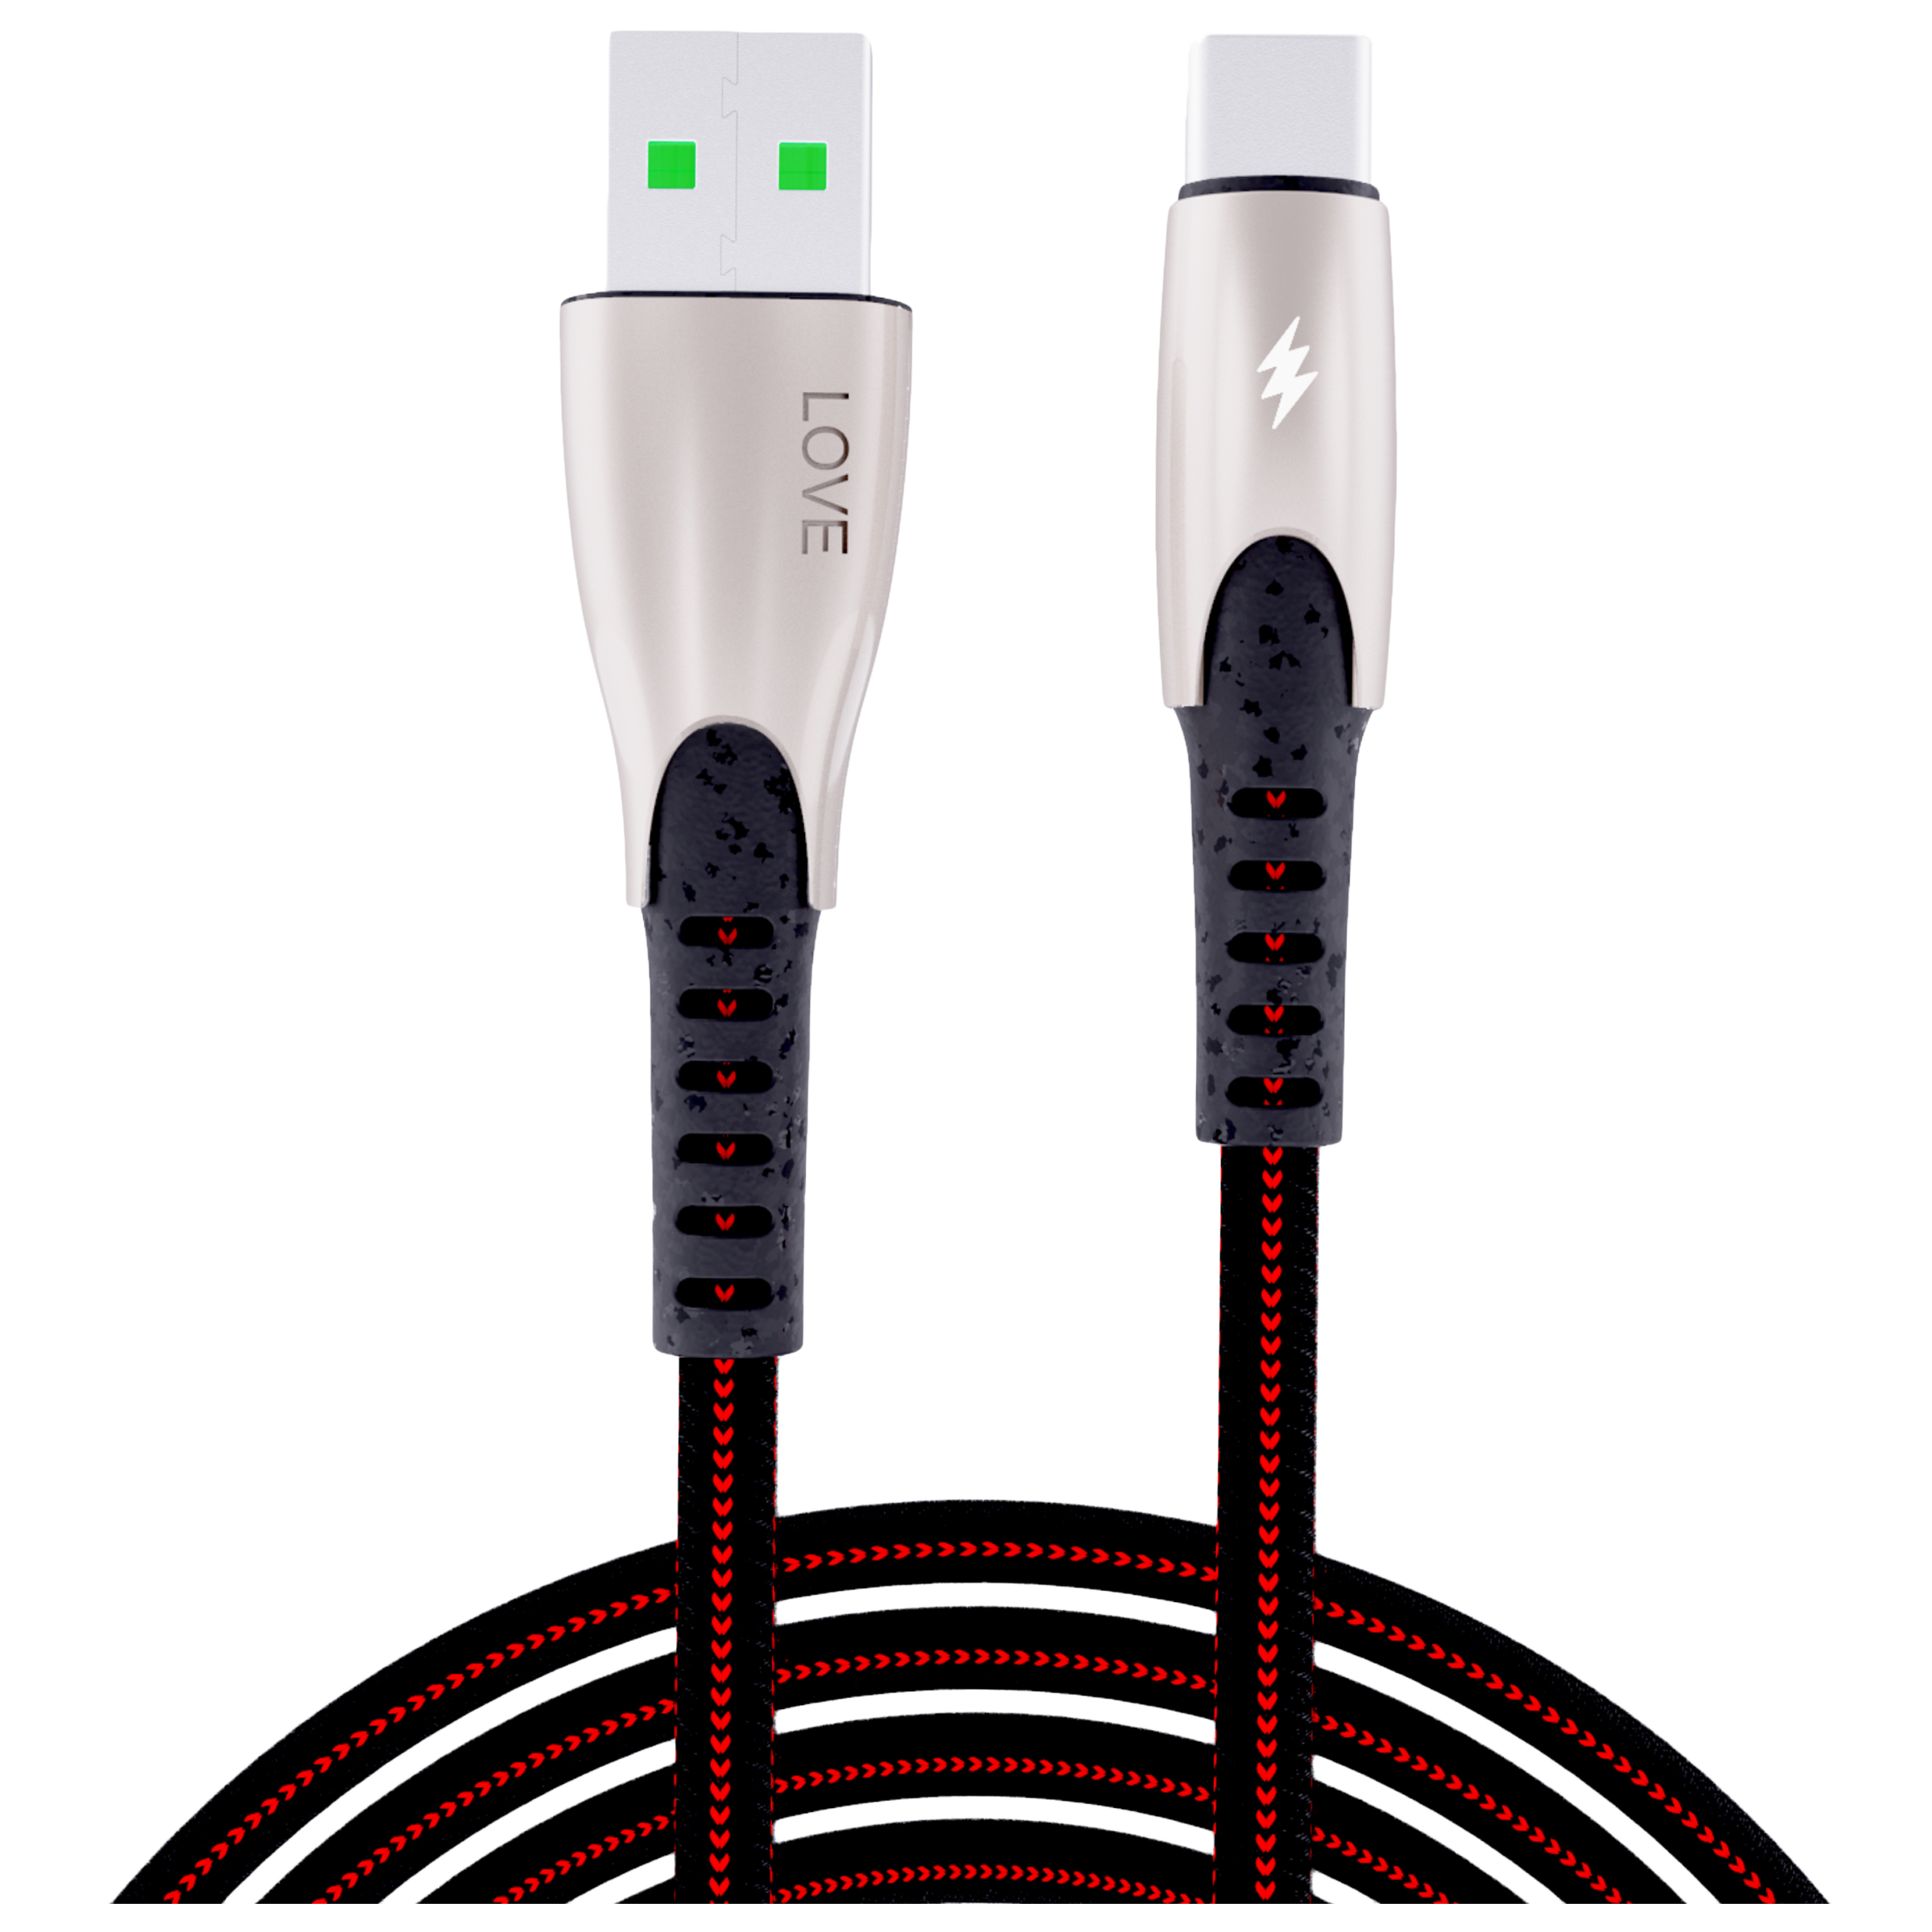 Back-Brainers - Back-Brainers Love TPE 1.2 Meter USB 2.0 (Type-A) to USB 3.0 (Type-C) Power/Charging USB Cable (Fast Charging Compatible, BB-12020, Black)